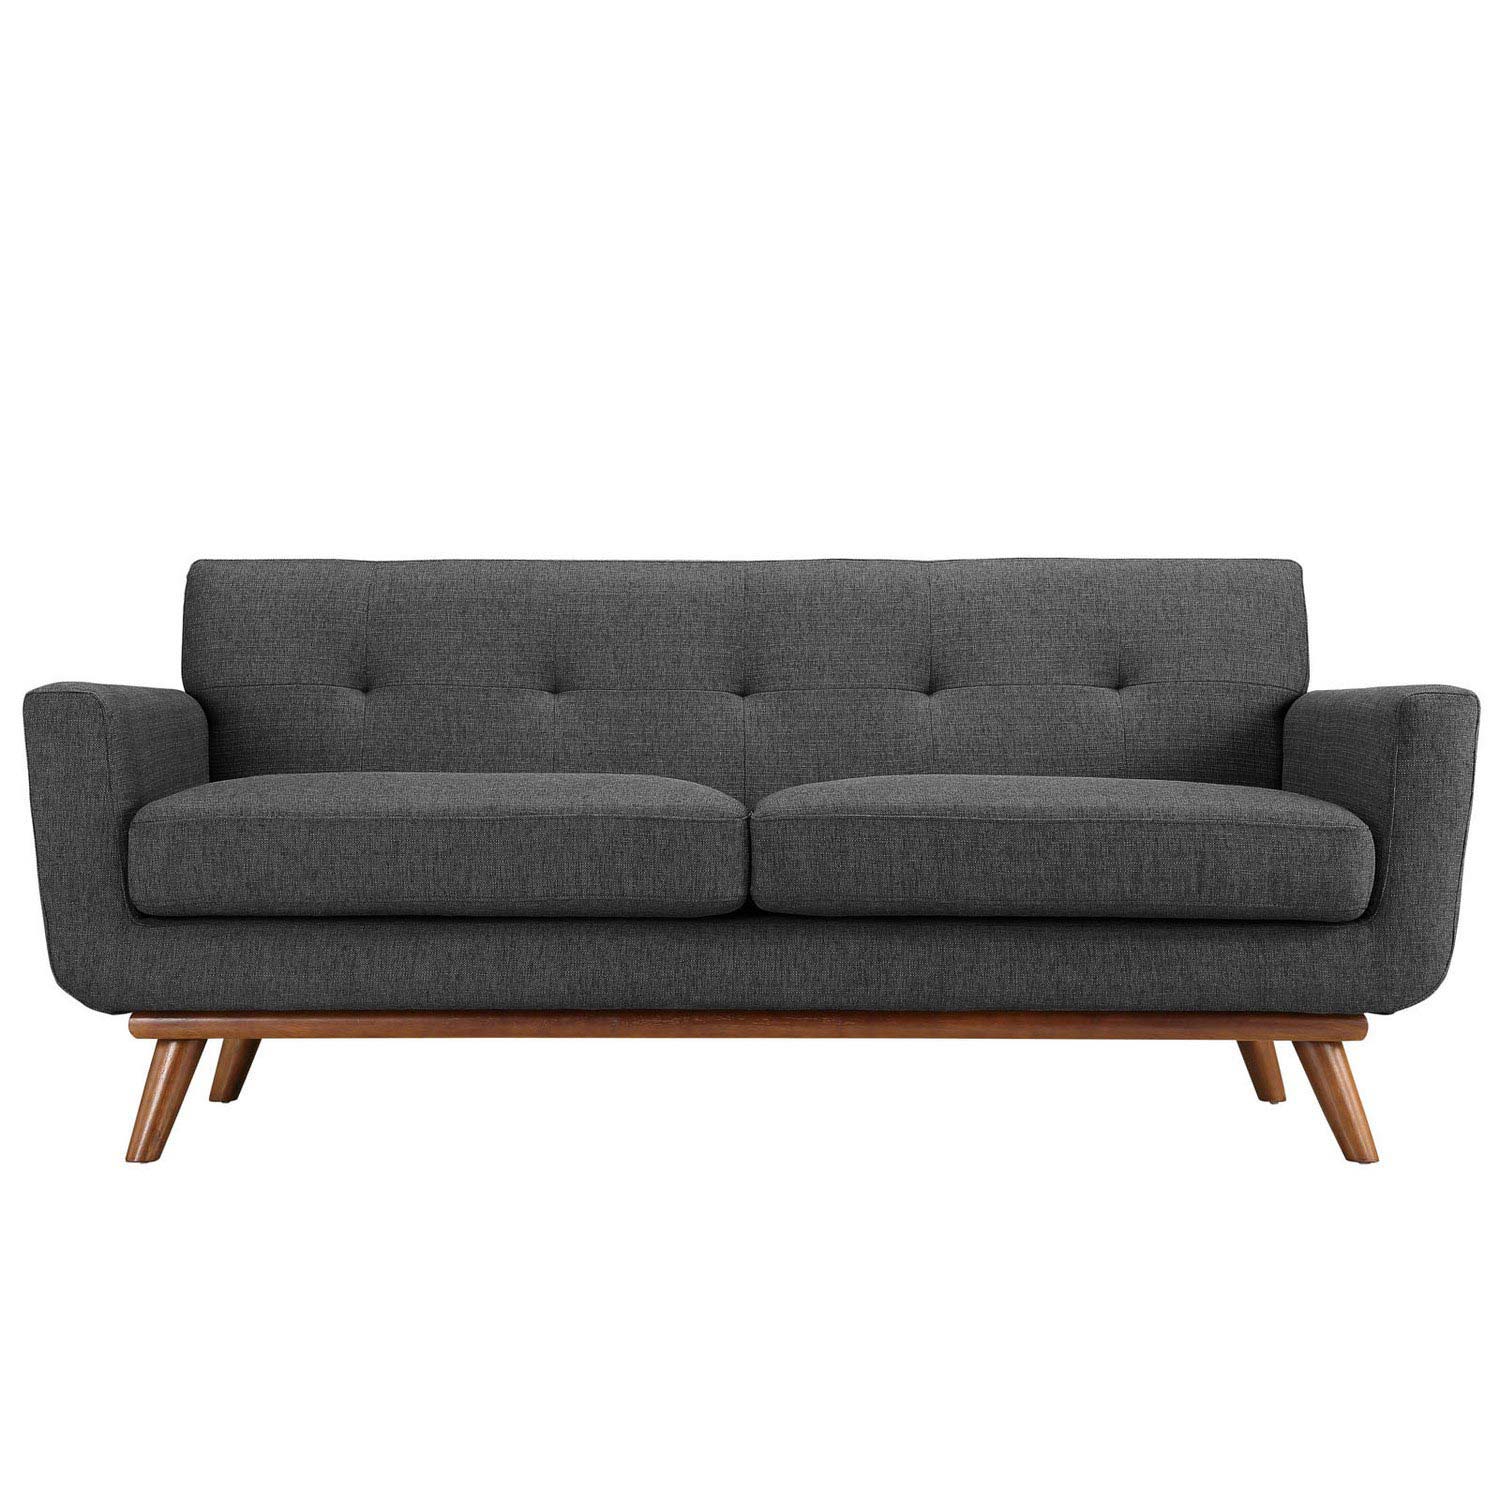 Modway Engage Upholstered Loveseat - Gray